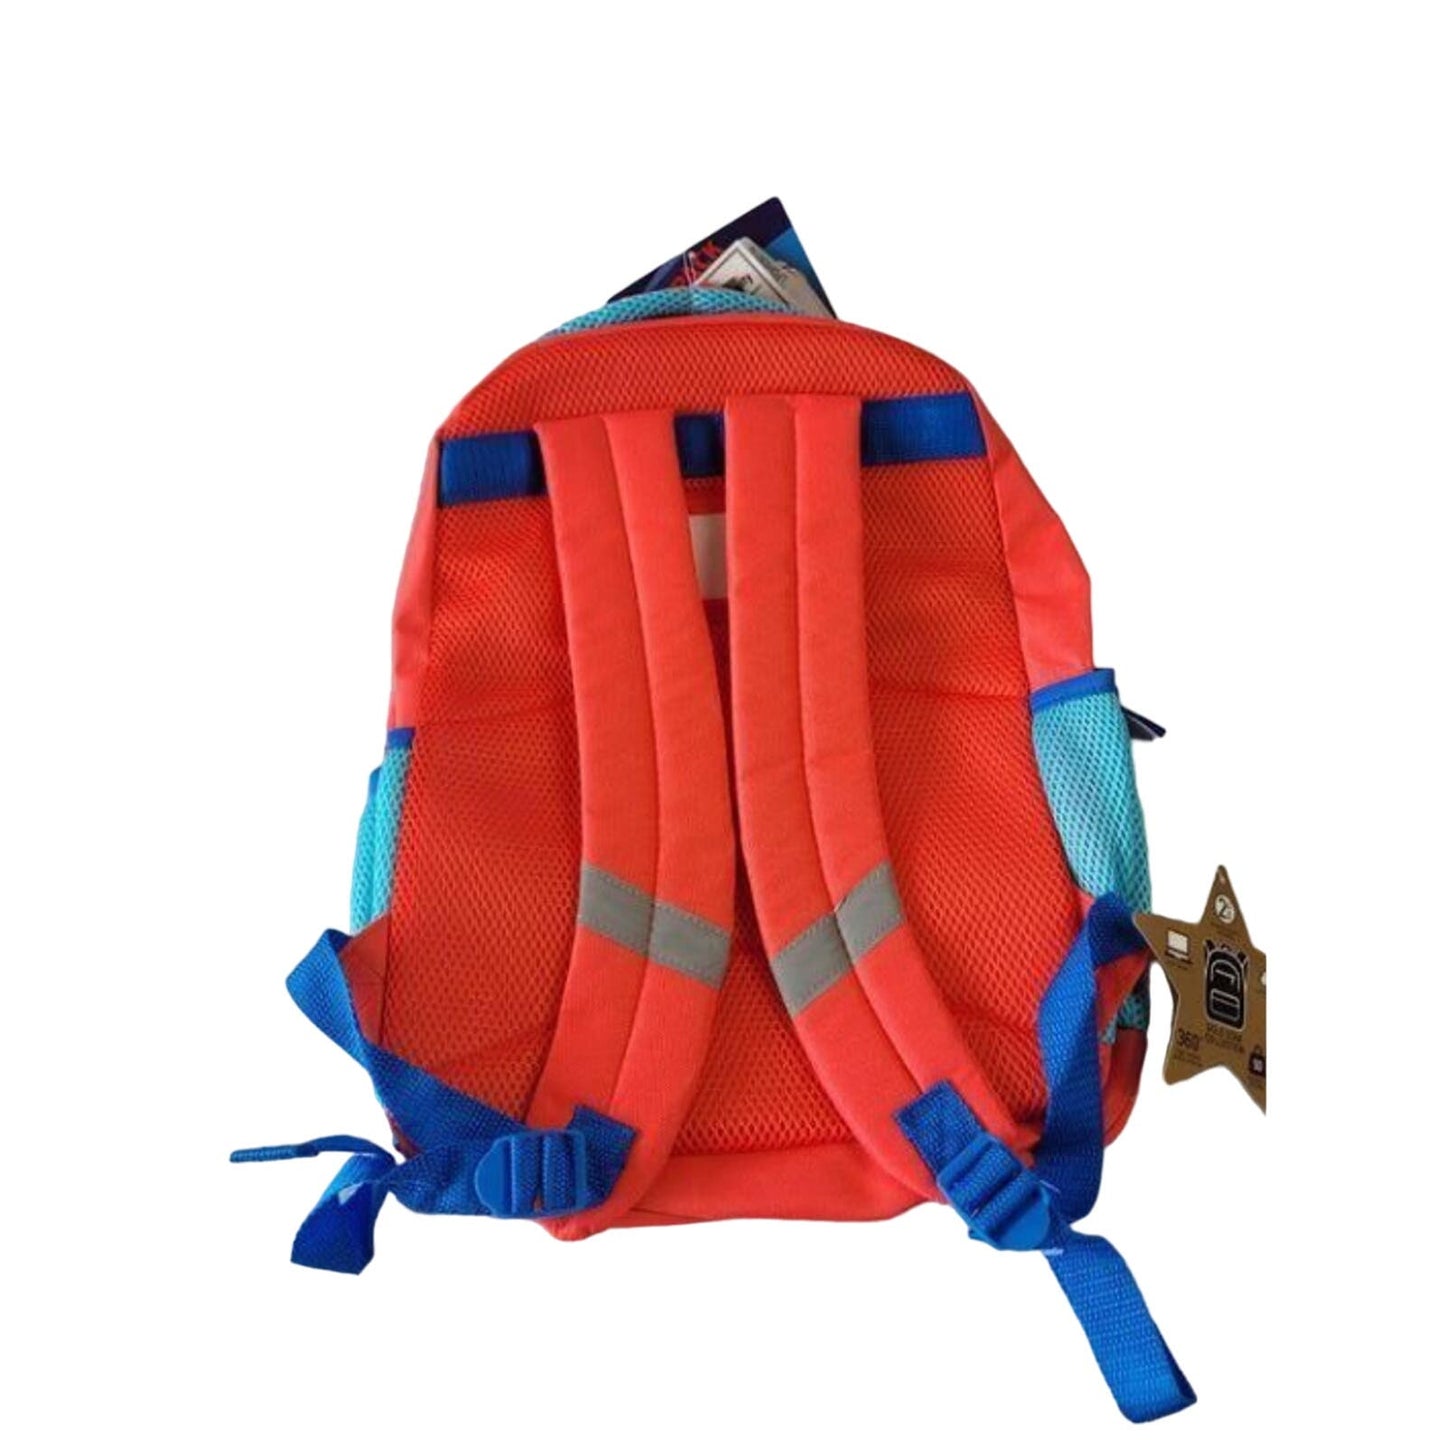 Ryan's World Kids 16" Large Backpack With Cape